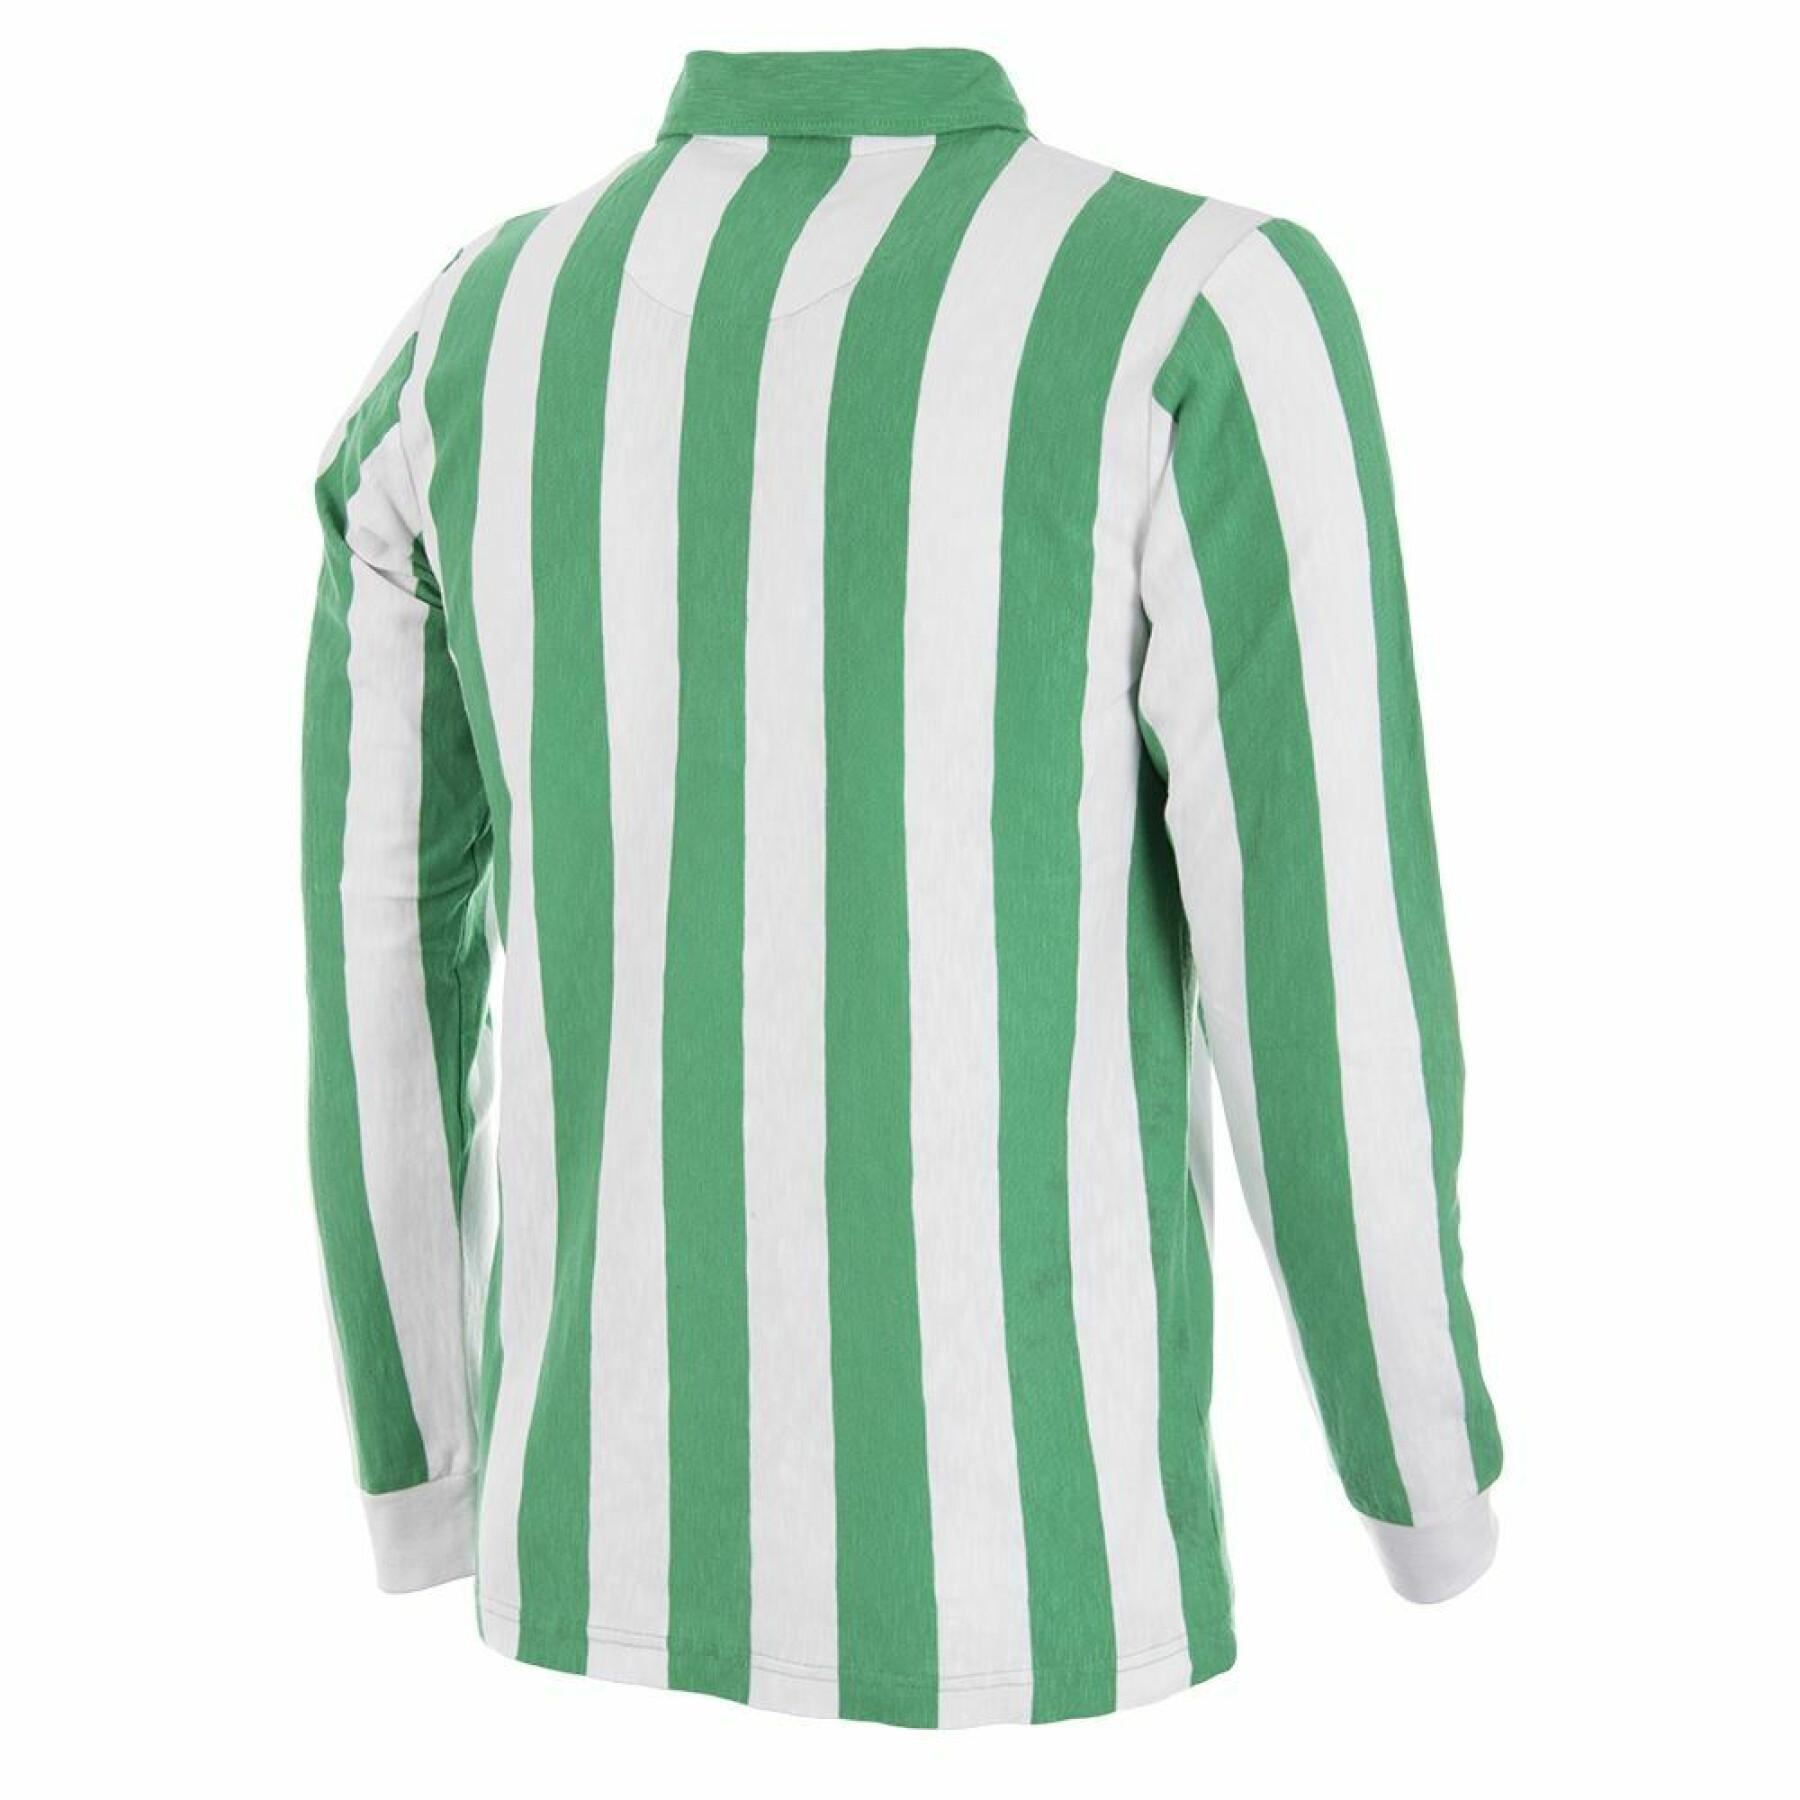 Jersey Real Betis Seville 1934/35